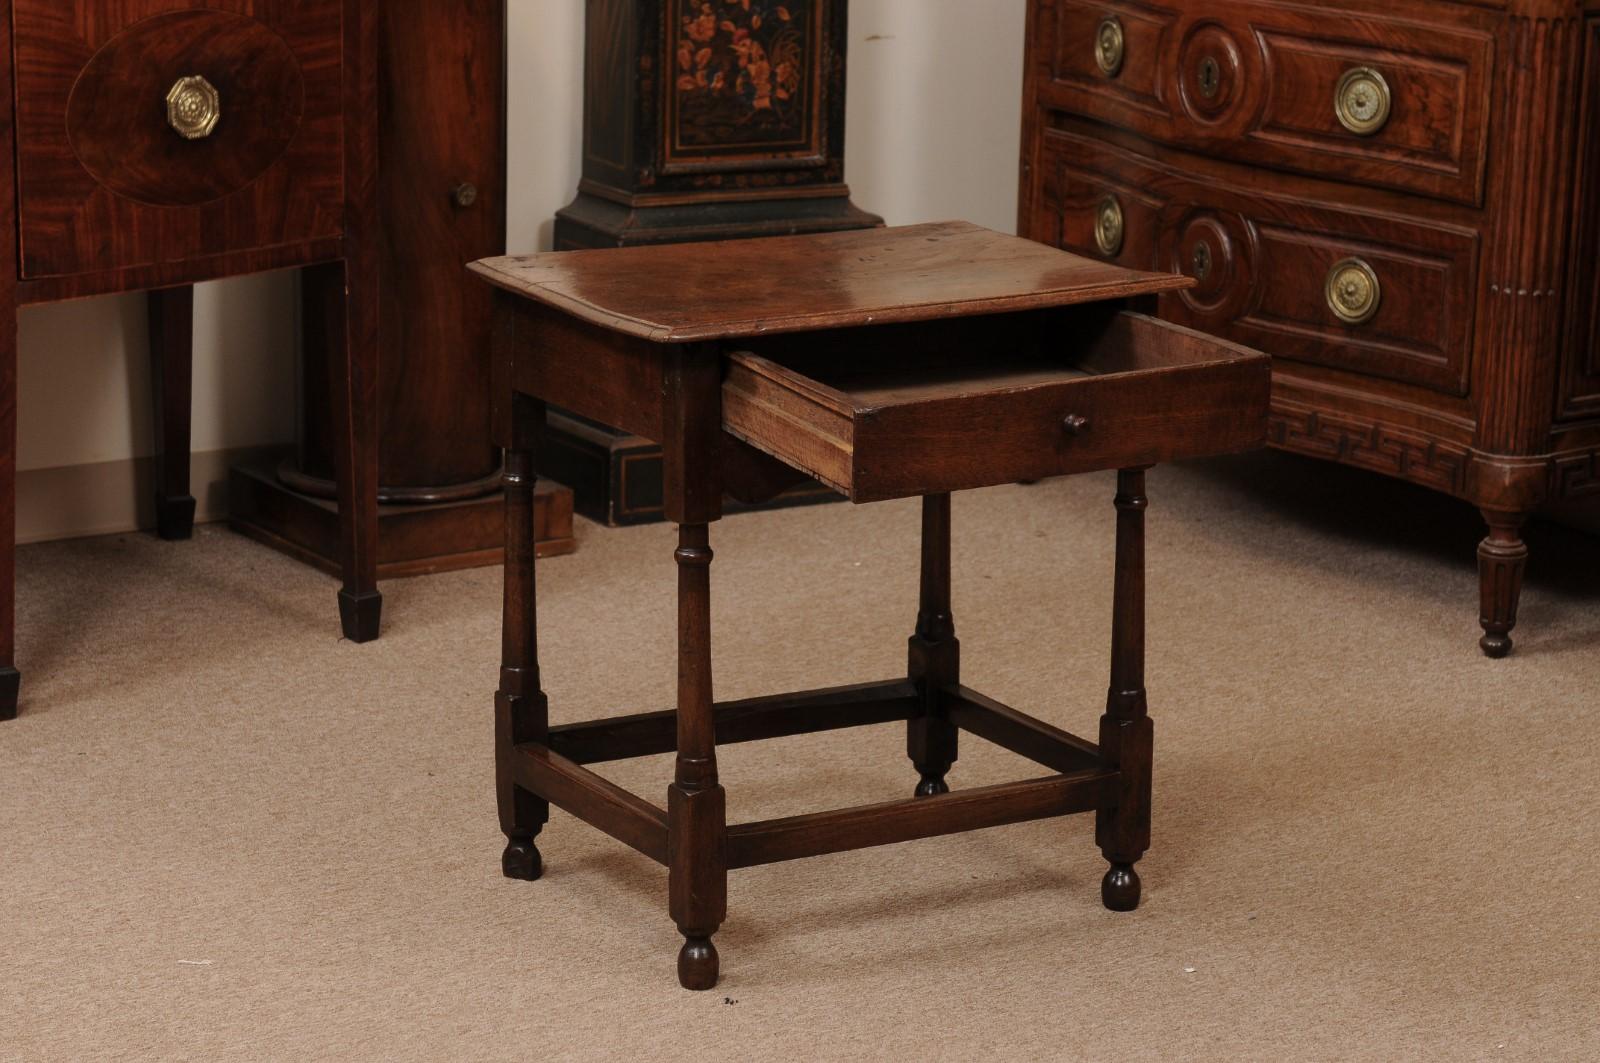 English Small 18th Century Oak Side Table with Drawer, Turned Legs 1